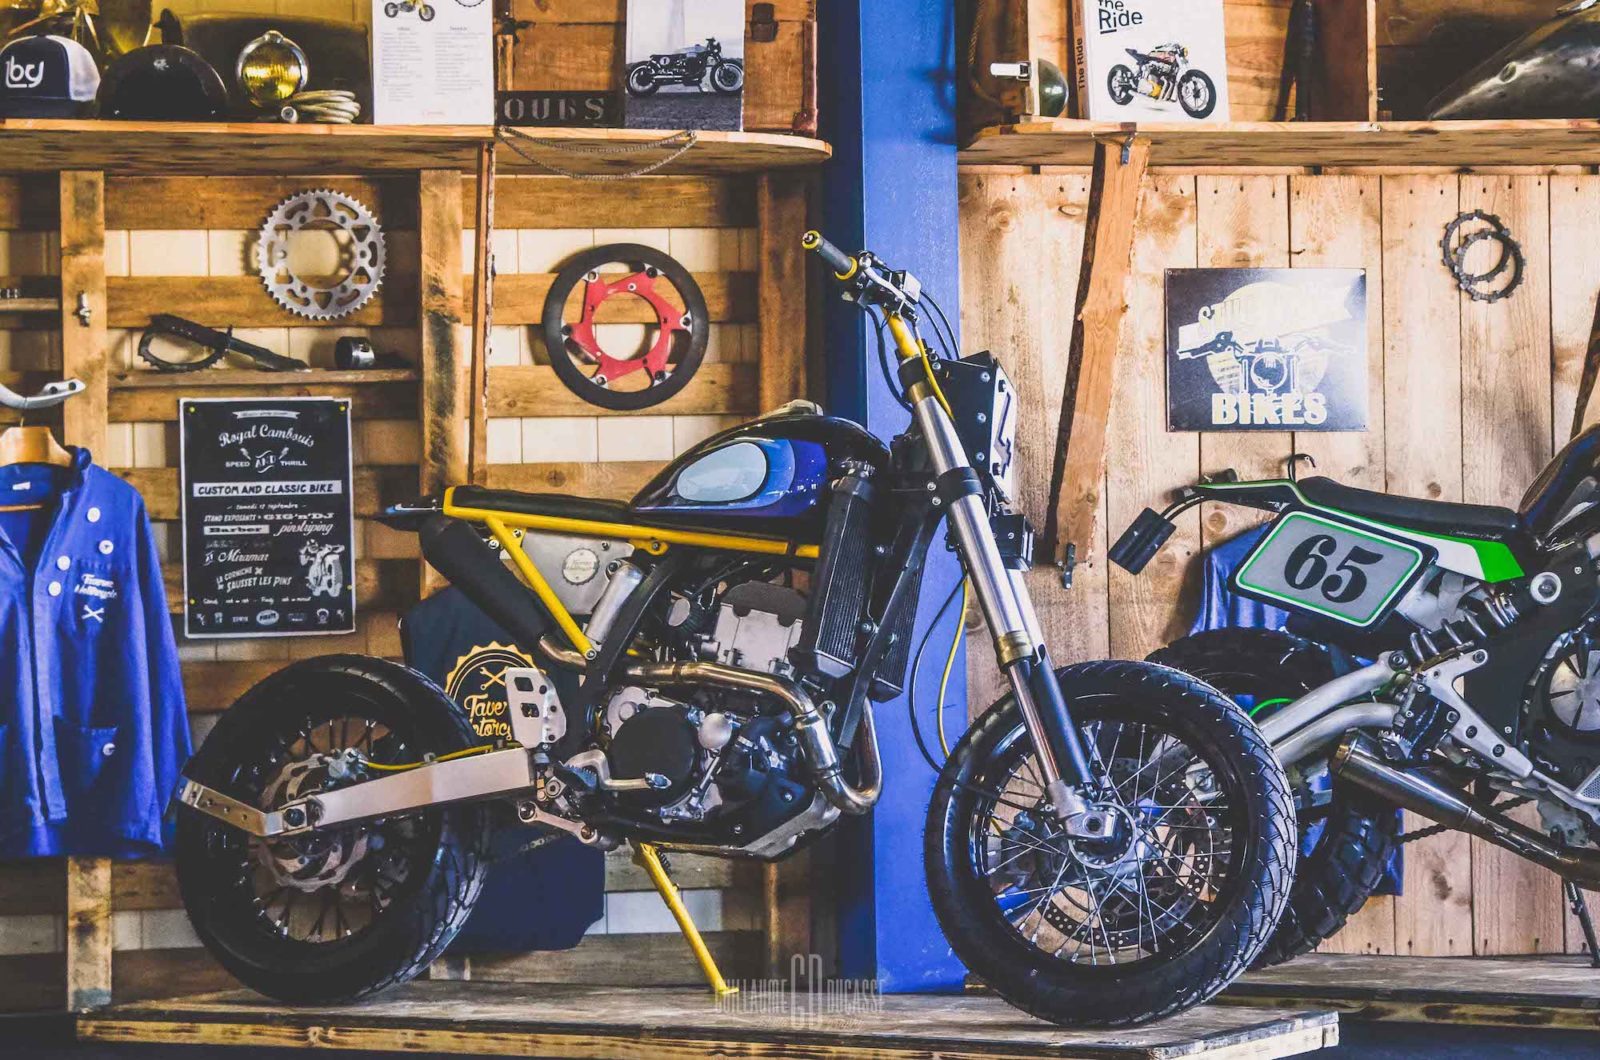 Taverne motorcycles Suzuki DRZ 400 custom cafe racer royal cambouis sud